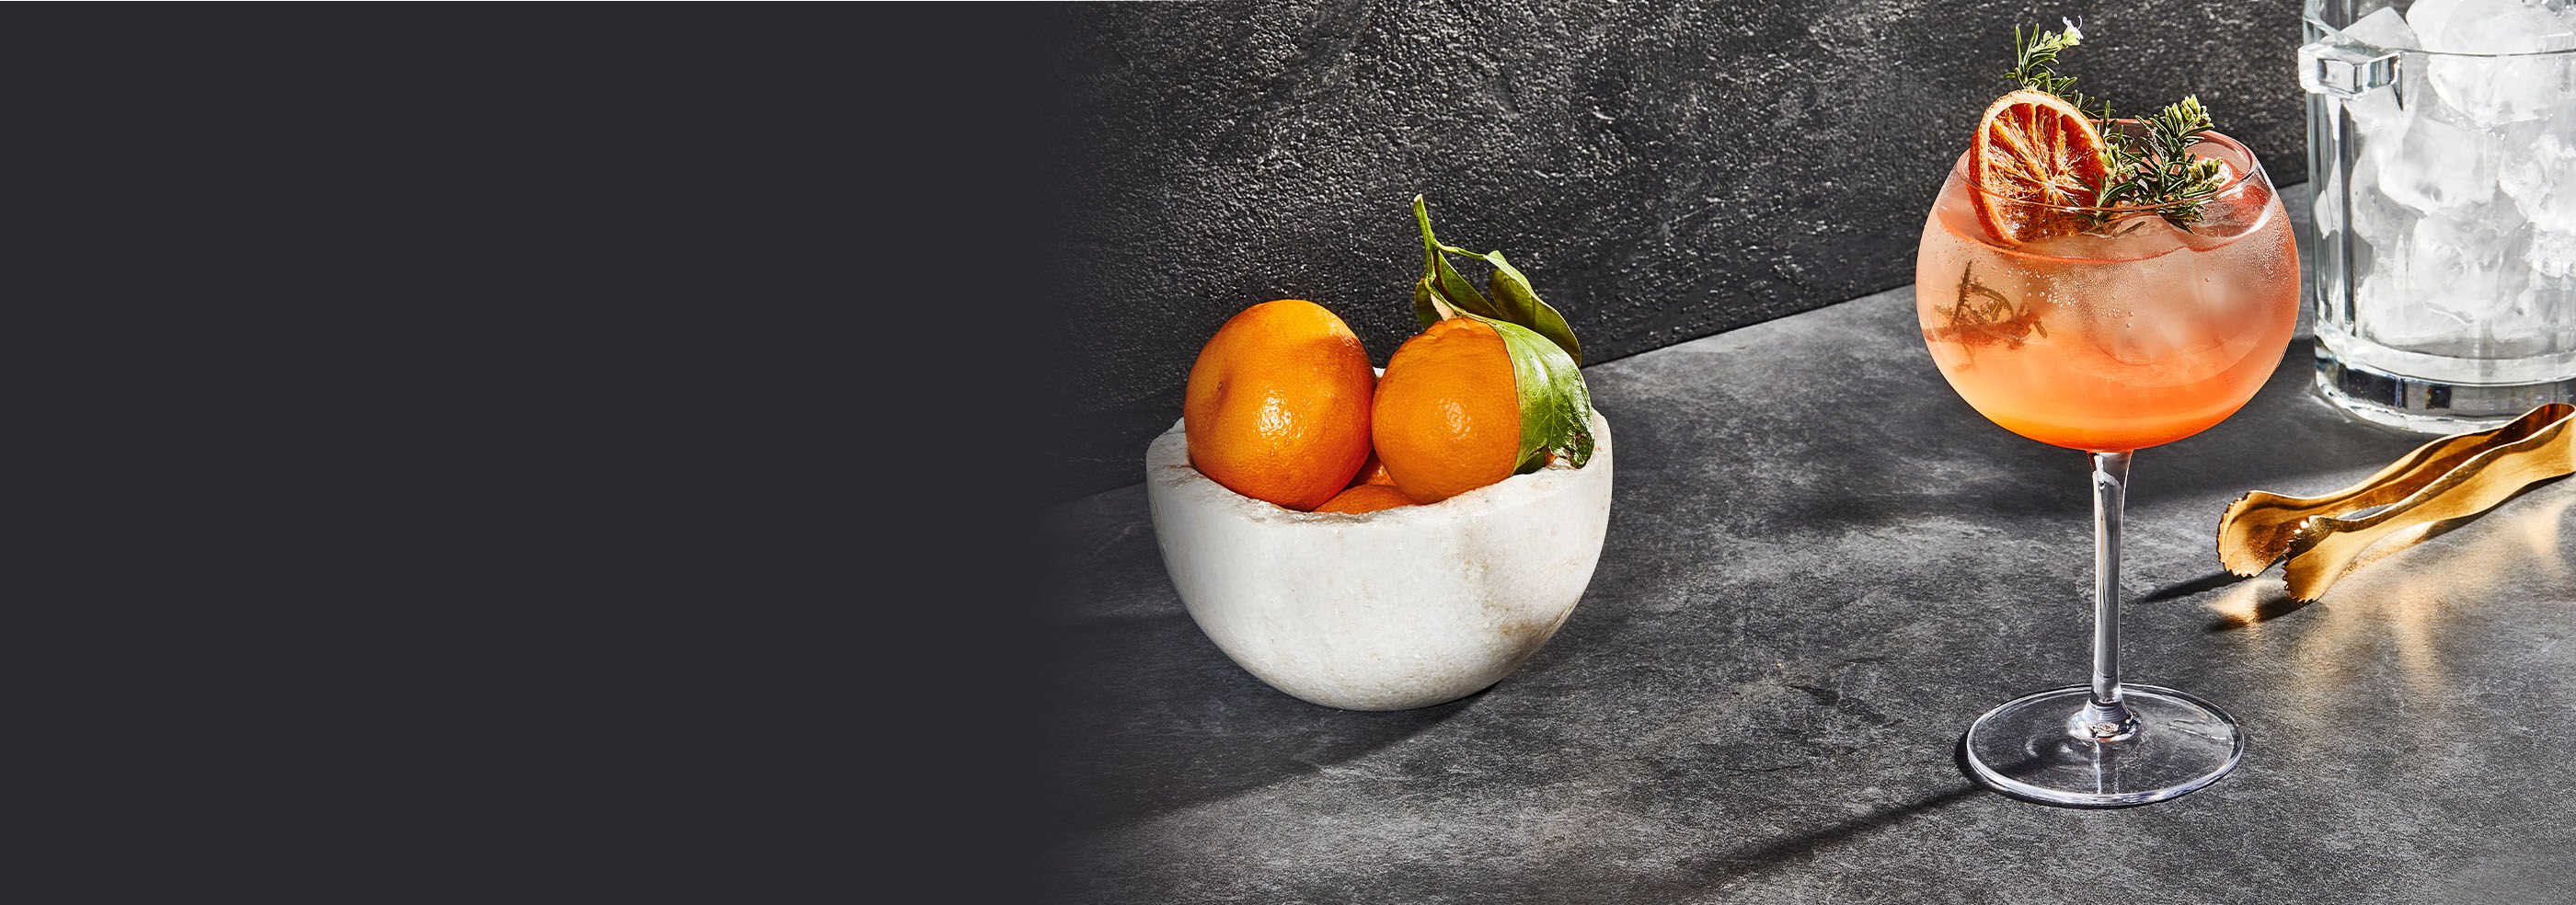 Image of a Spritz, served on a slate tray with a bowl of oranges next to it.